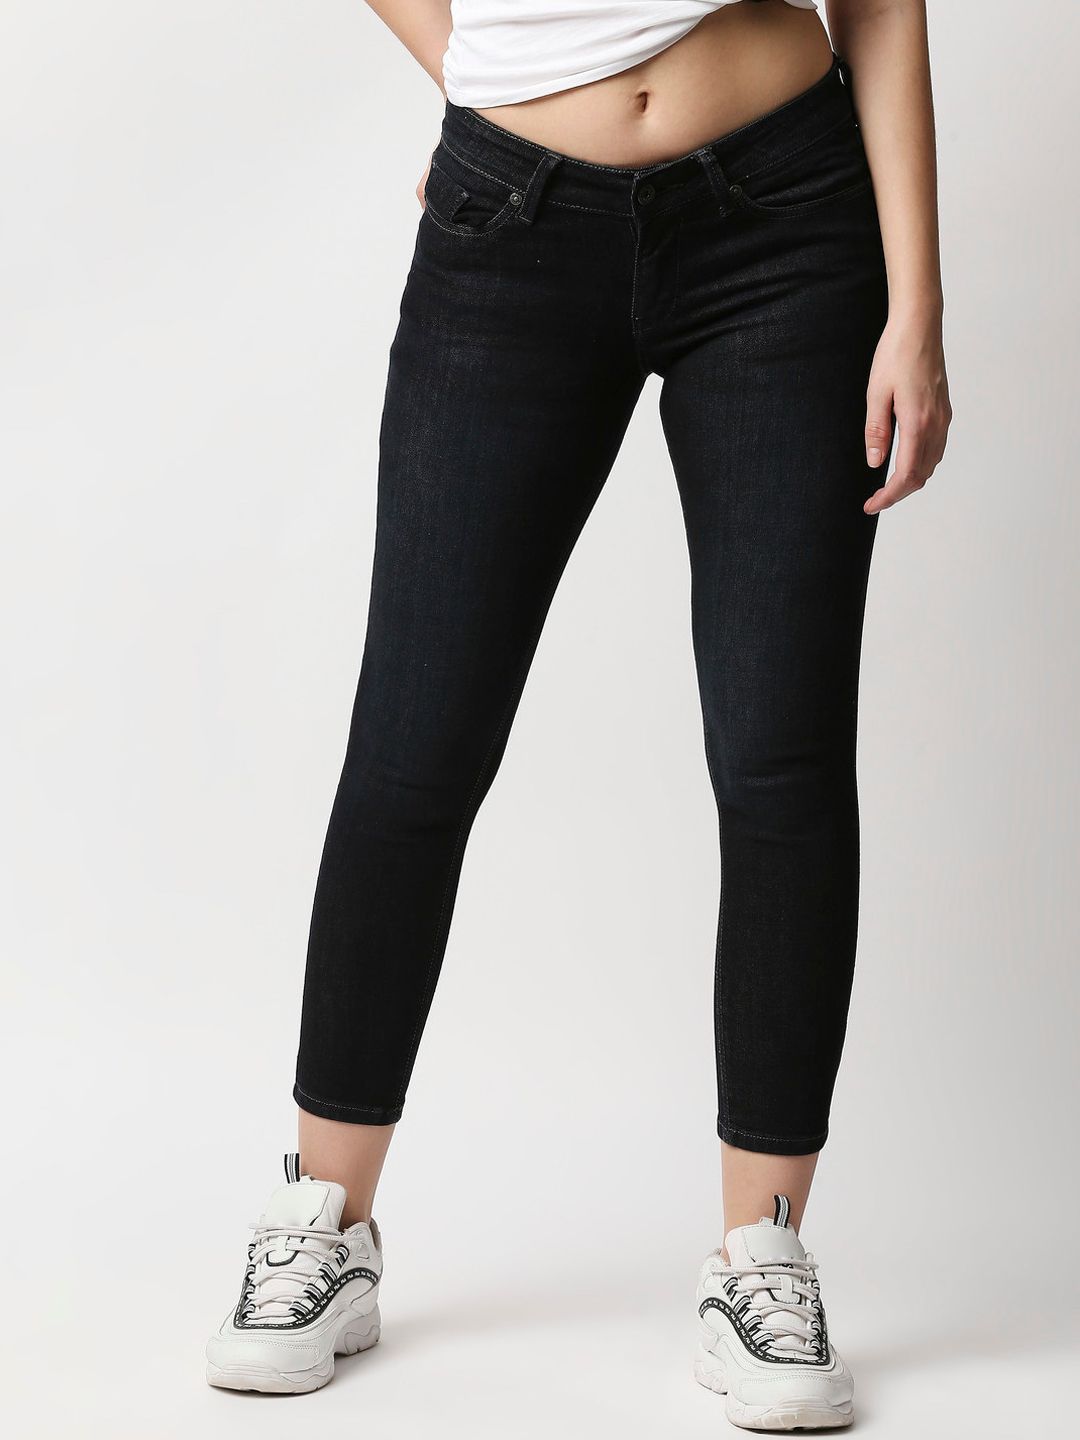 Pepe Jeans Women Black Skinny Fit Cotton Stretchable Jeans Price in India